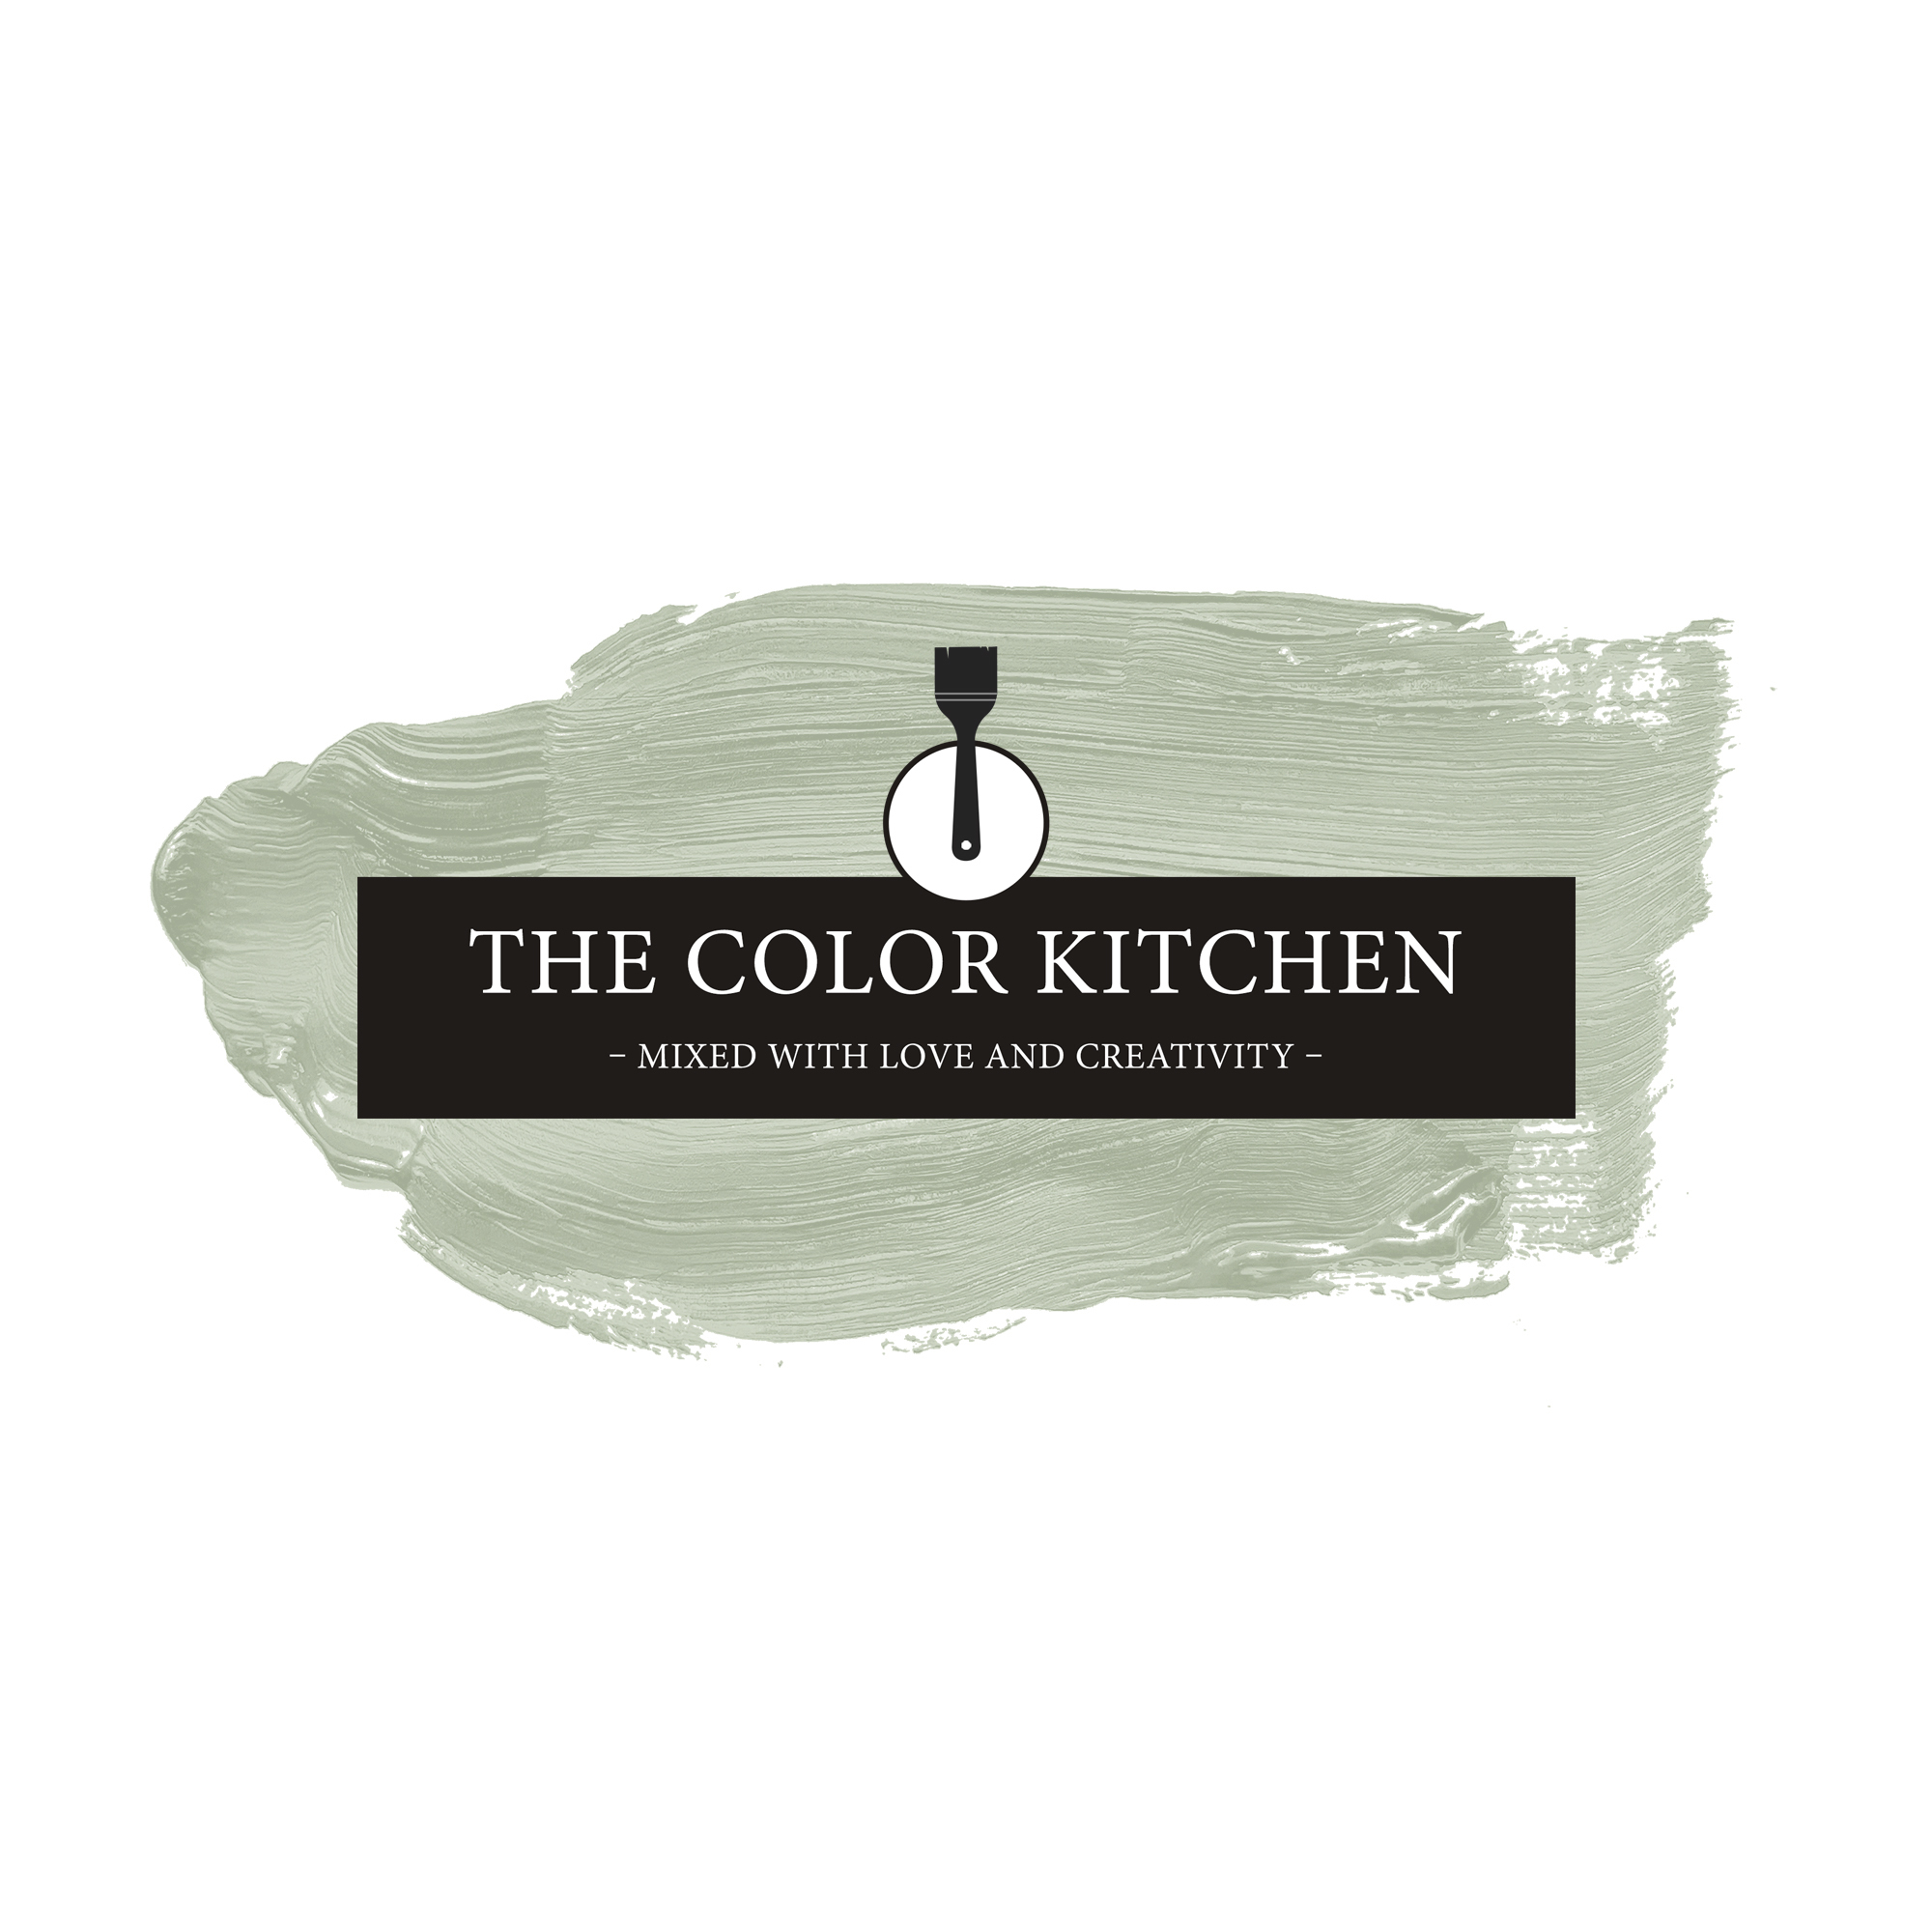 The Color Kitchen Lovely Lime 5 l